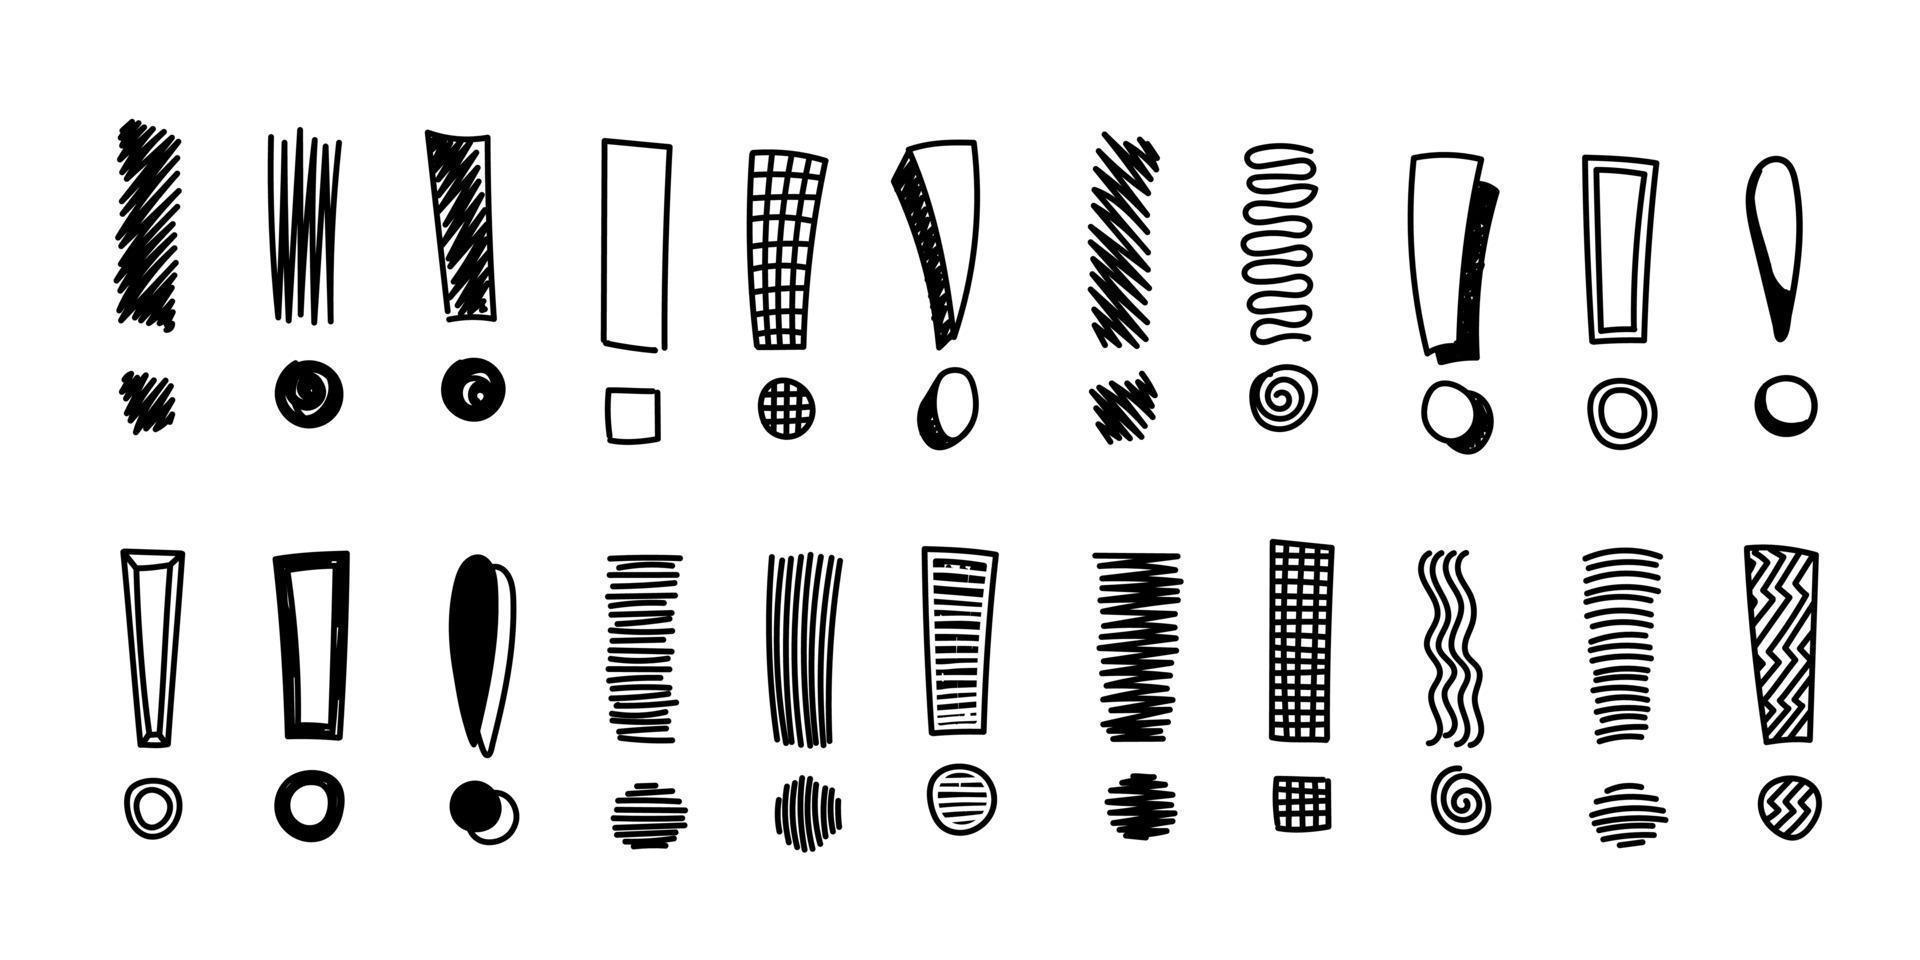 Exclamation marks collection in different styles. Perfect for lettering and illustrations. vector